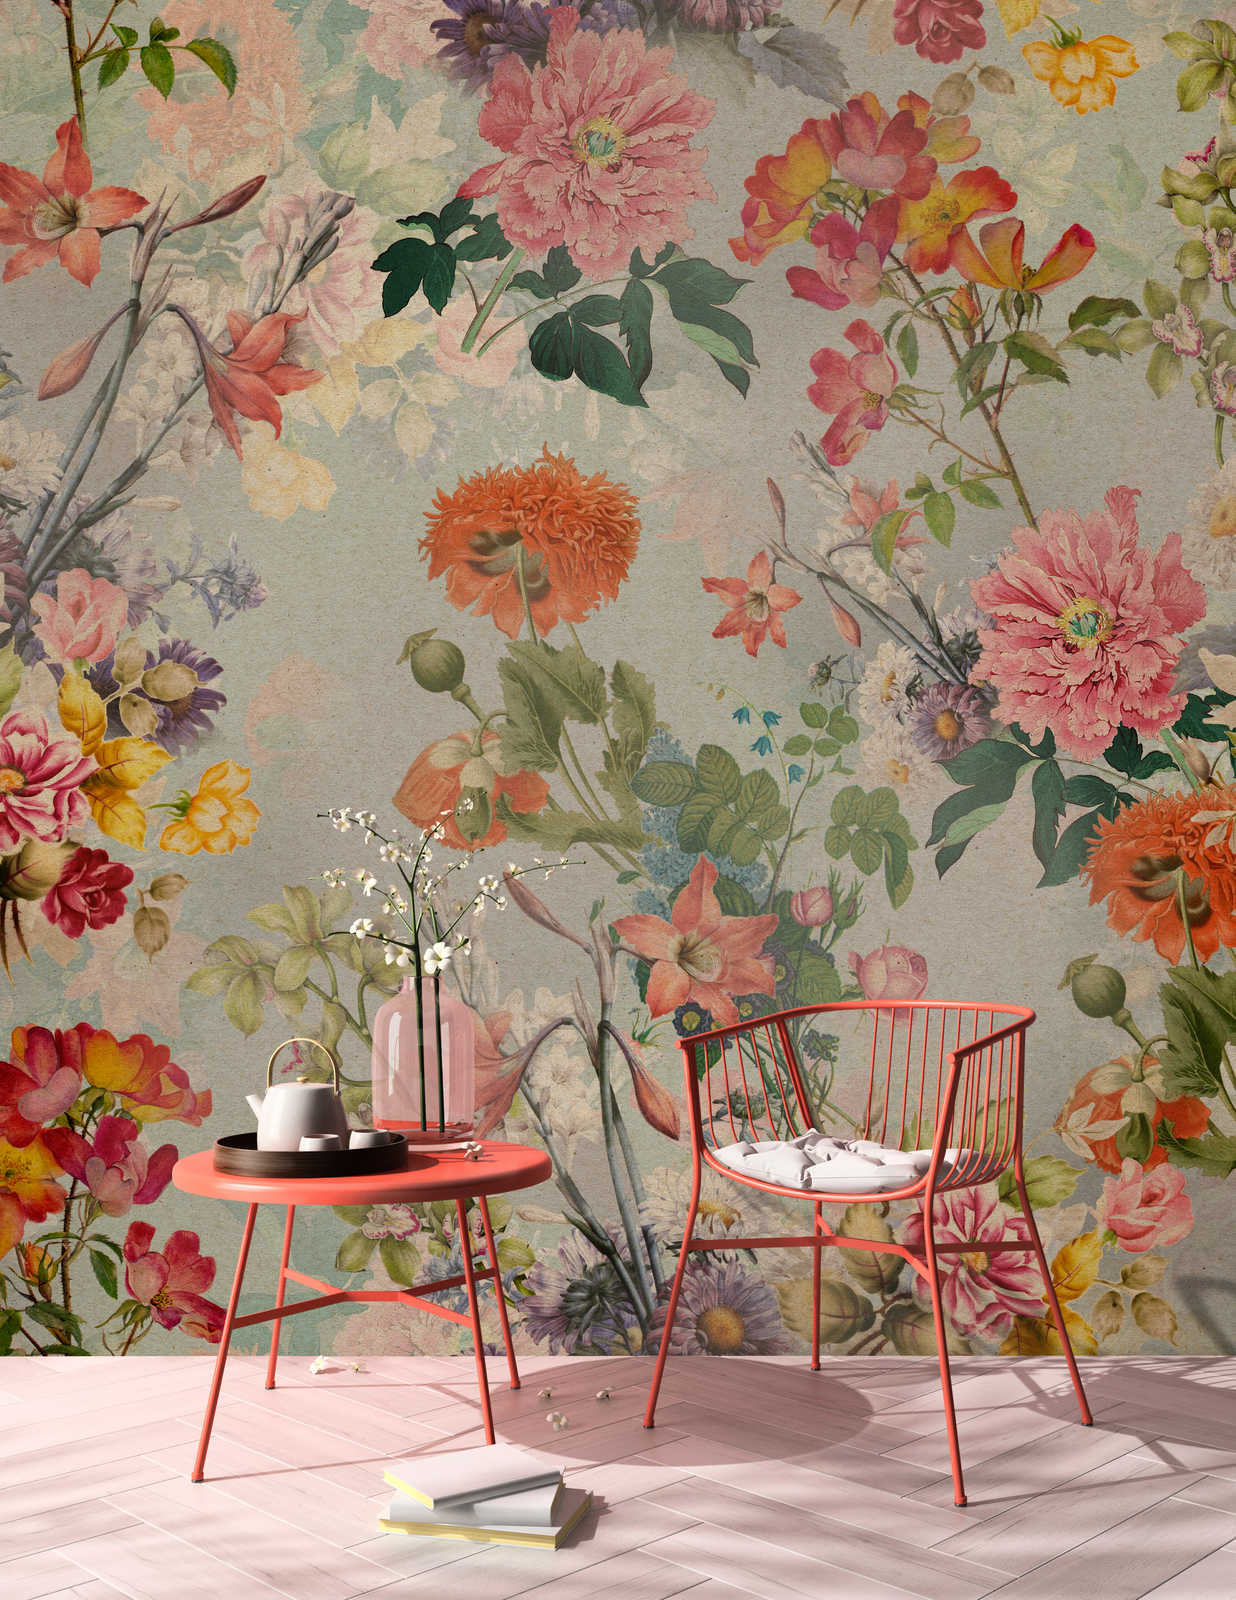             Amelies Home 1 - Vintage flowers mural in romantic country style
        